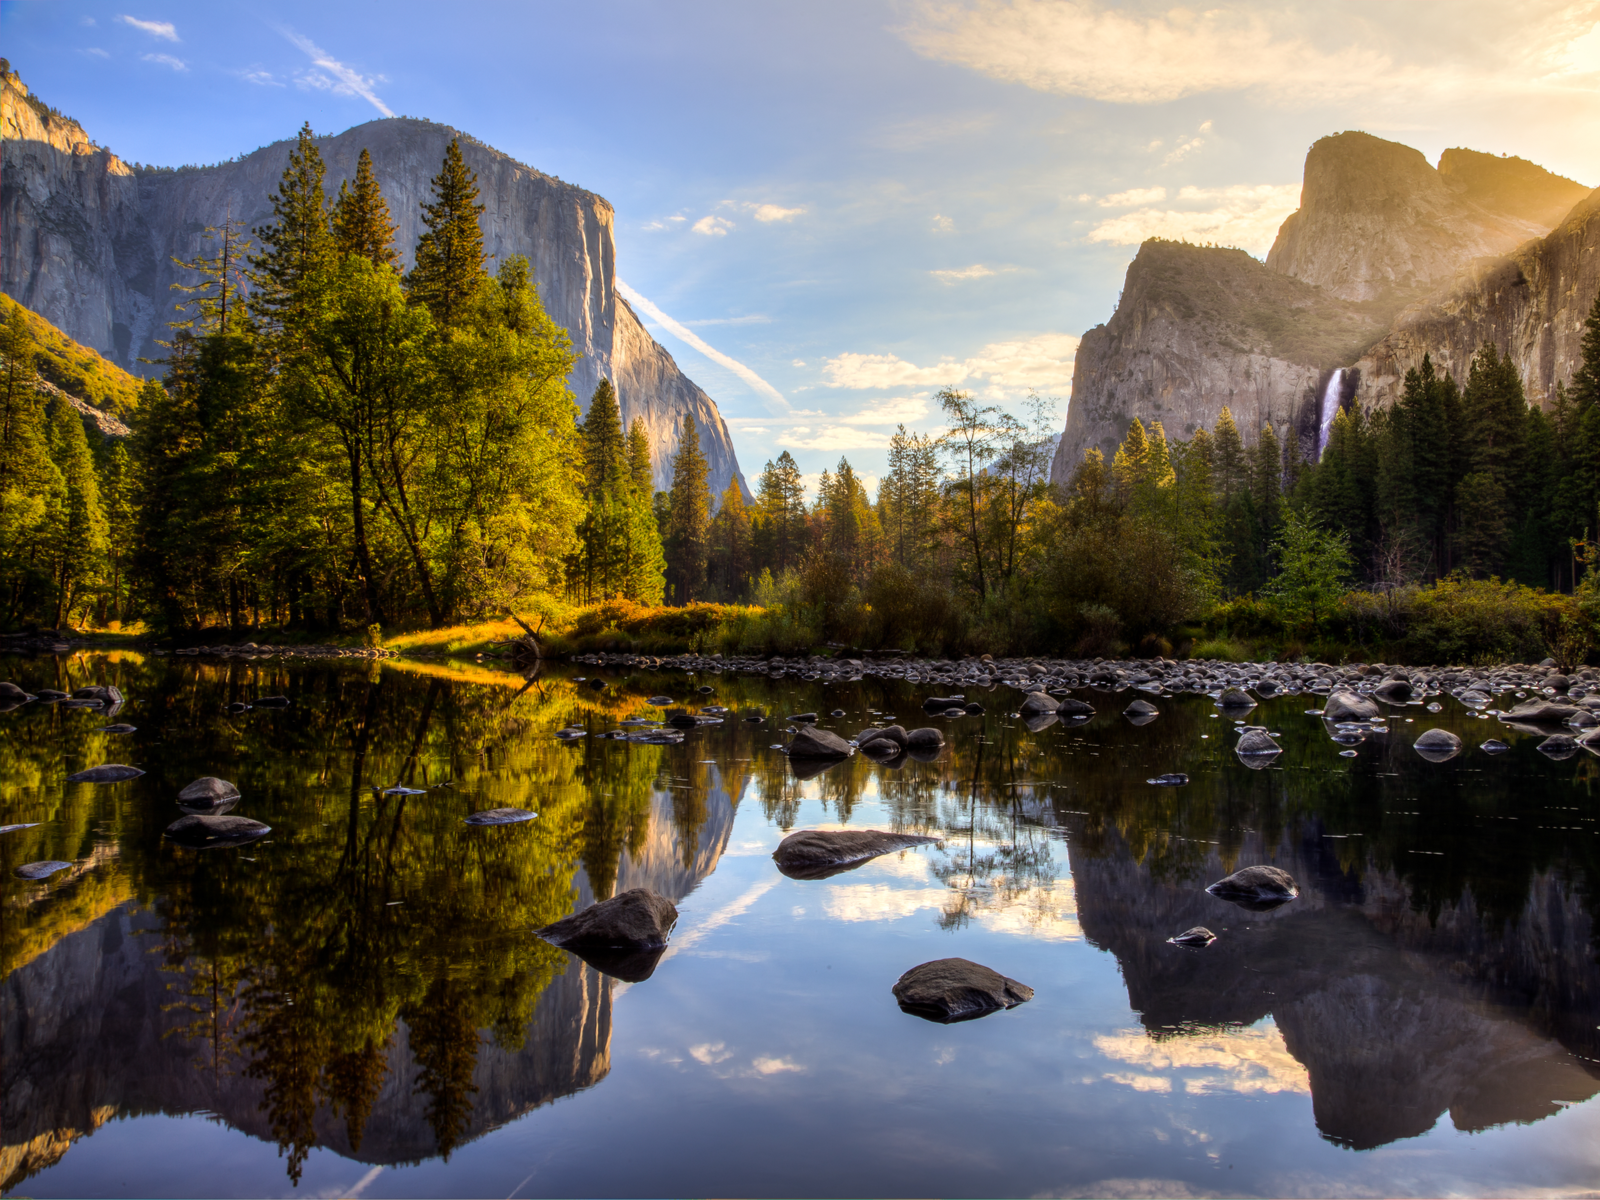 A Valley pictured in Summer, the best time to visit Yosemite National Park